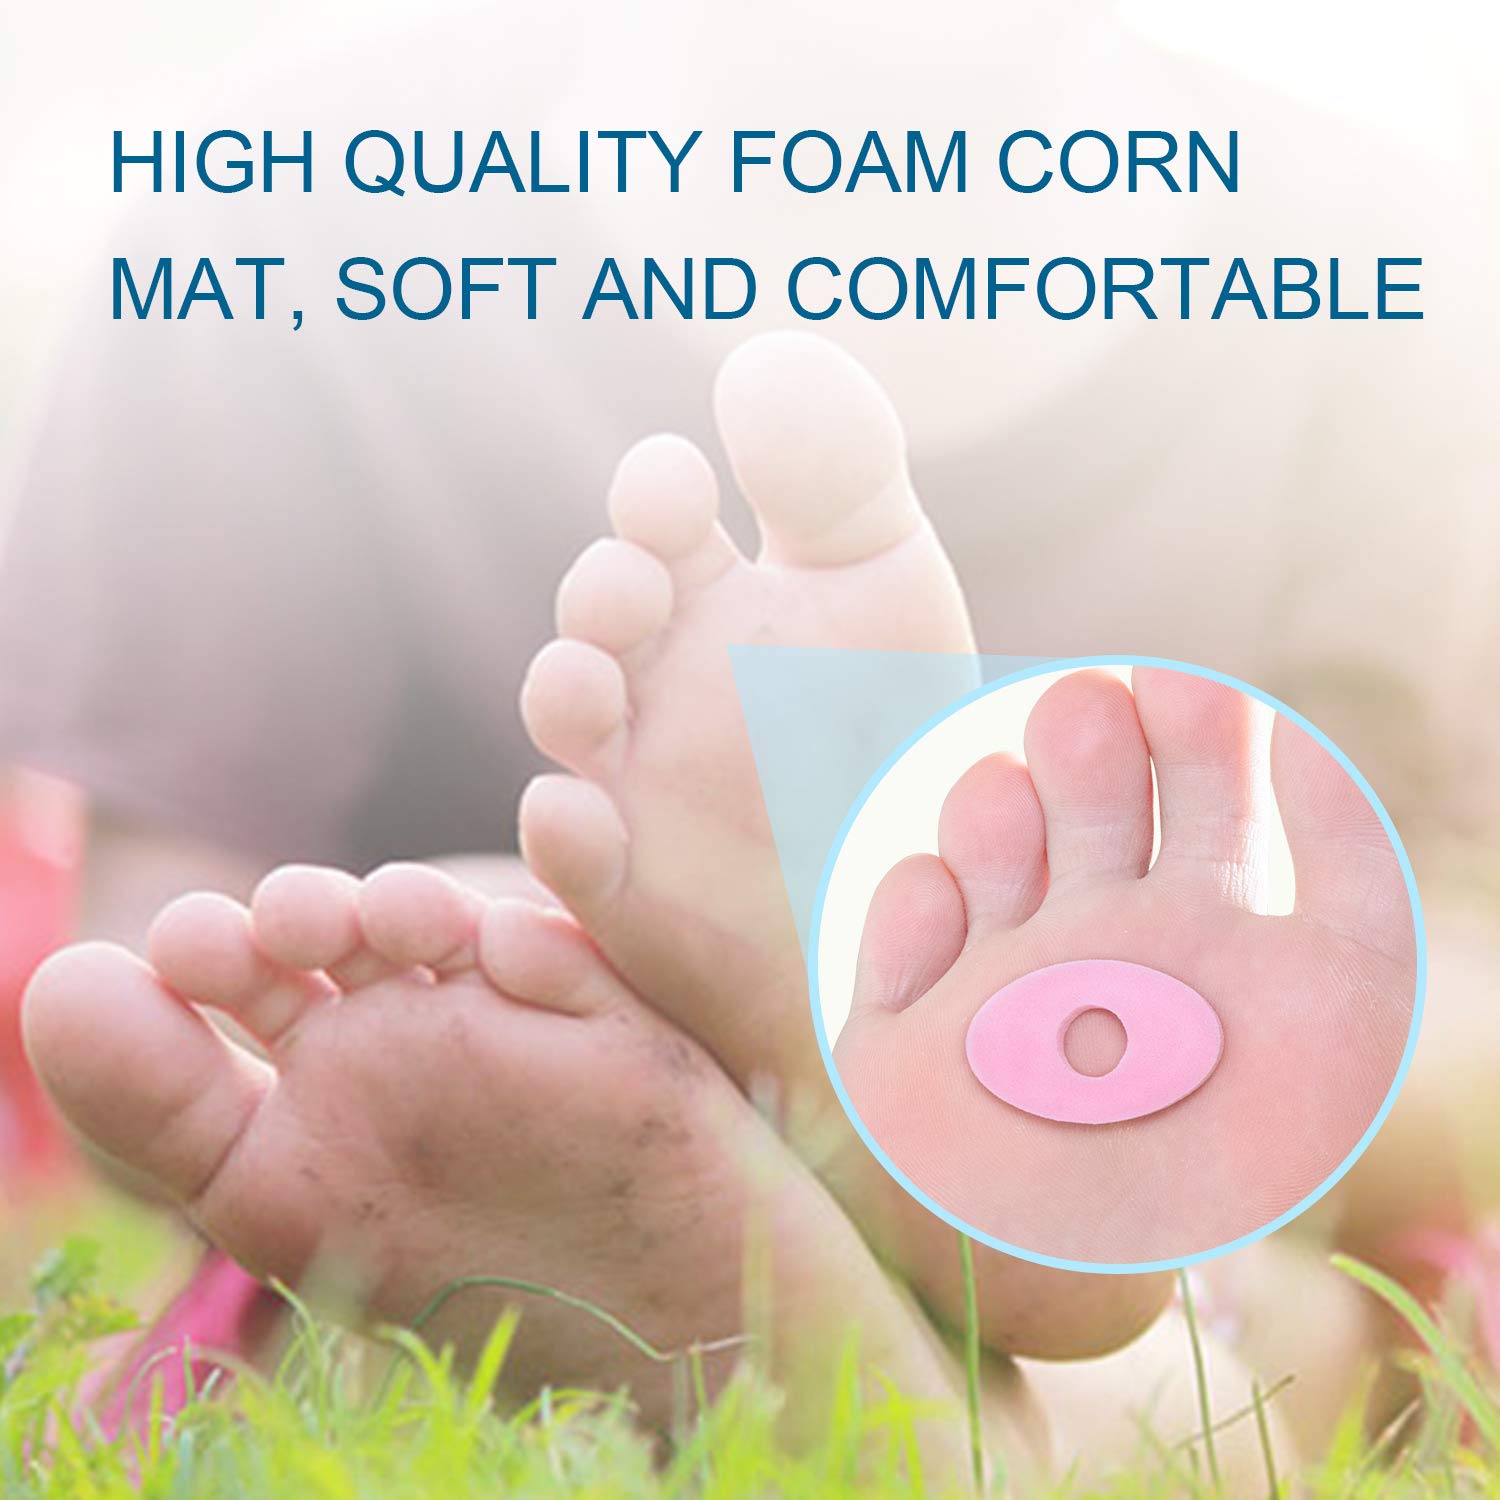 Buy 6 Sheets/36 Pcs Transparent Oval Gel Foot Corn Rings Silicone Callus  Cushions Soft Sticky Foot Protector Corn Pads Toe Pads Self Adhesive Back  Heel Sticker Shoes Sticker Online at Low Prices